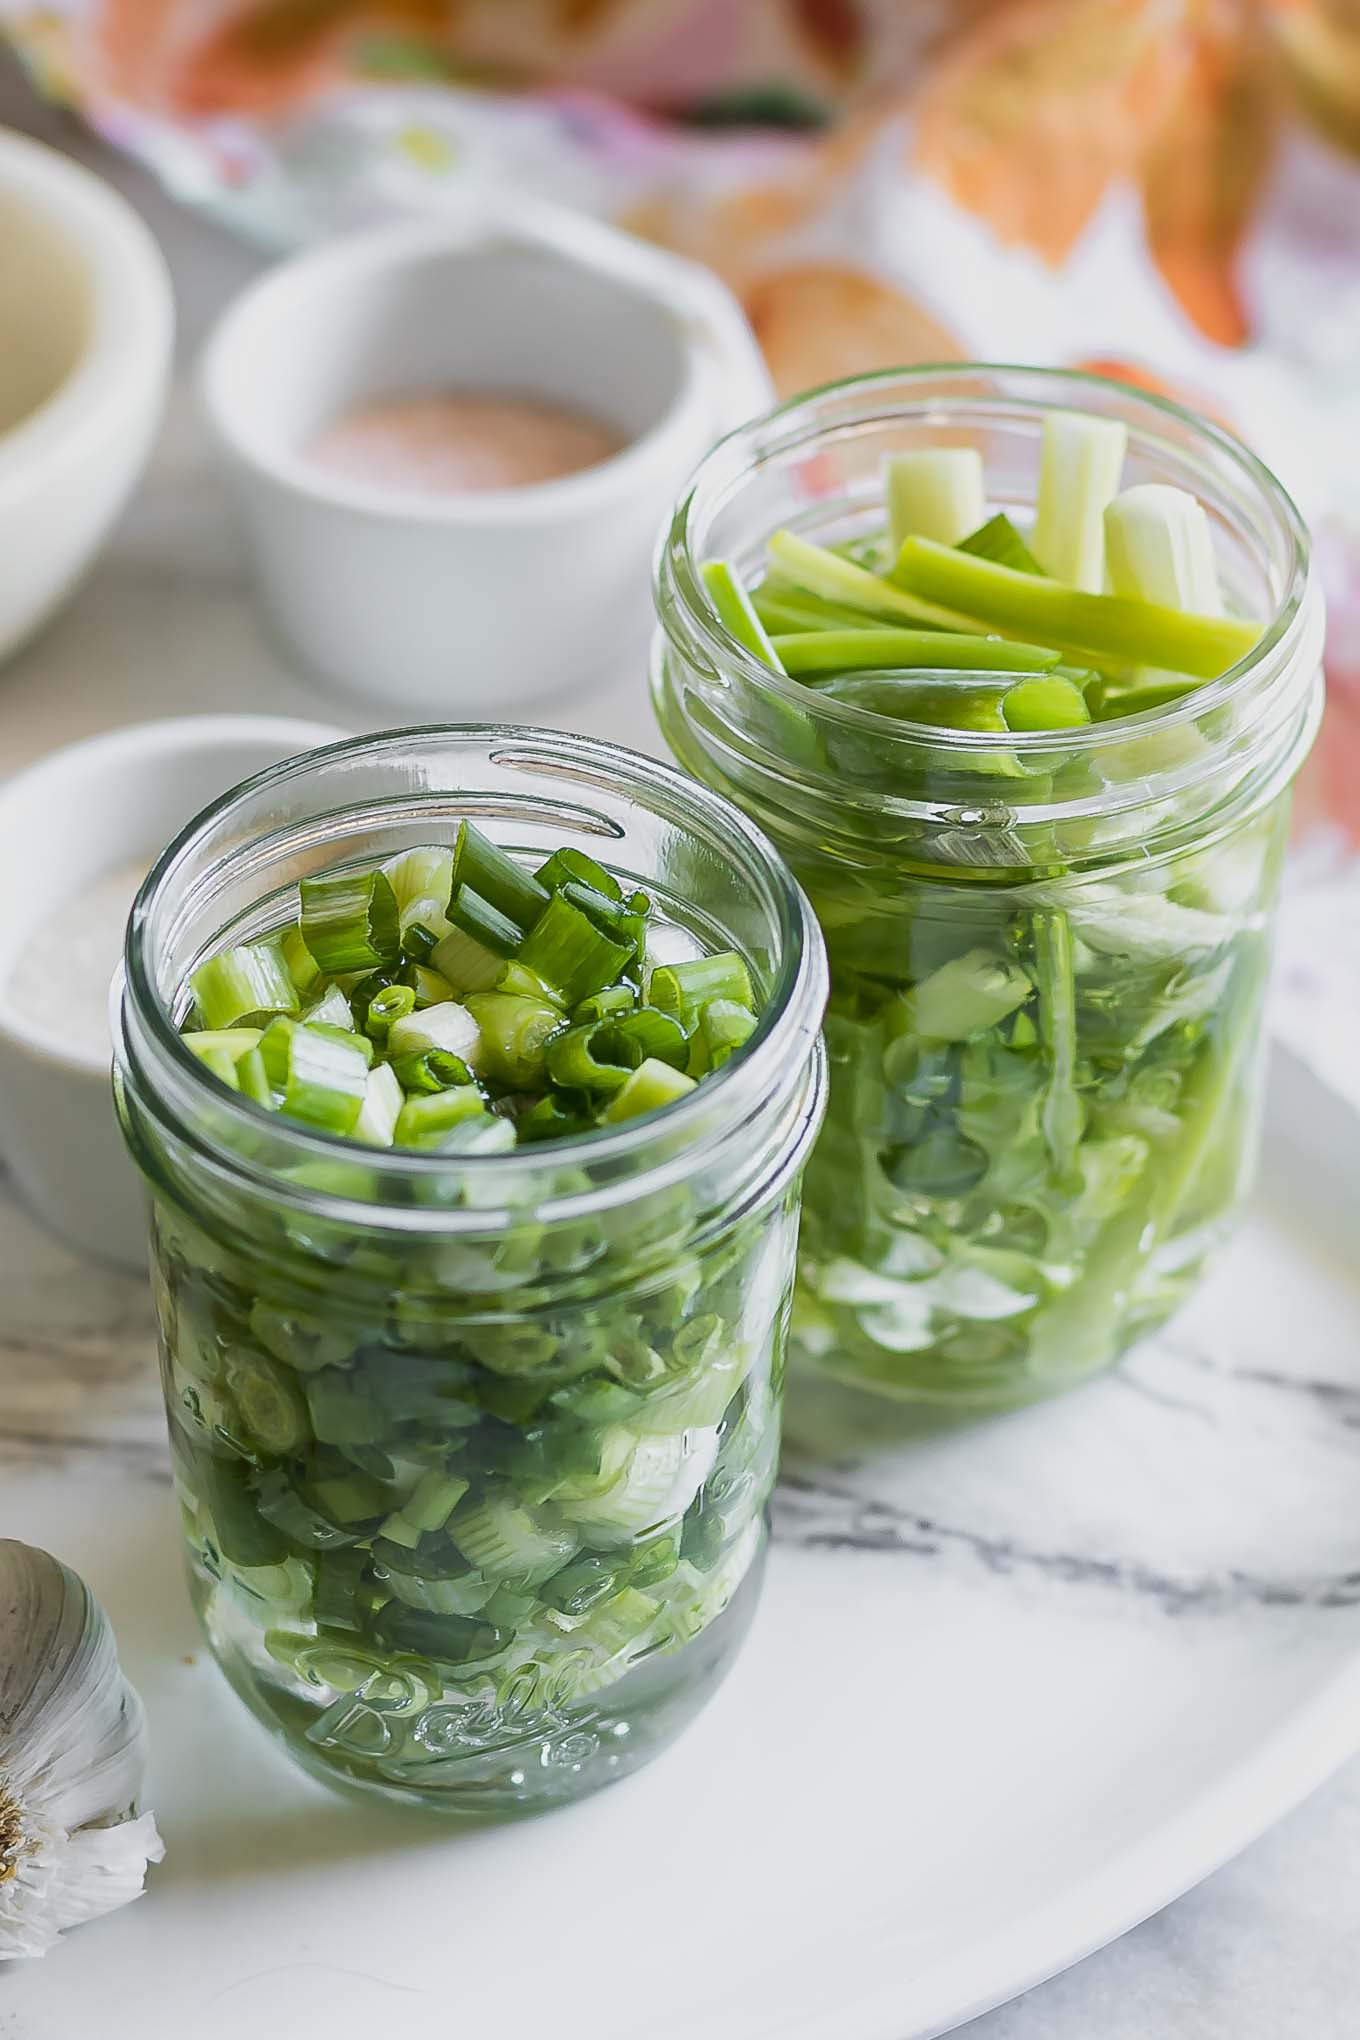 jars of pickled scallions on a table